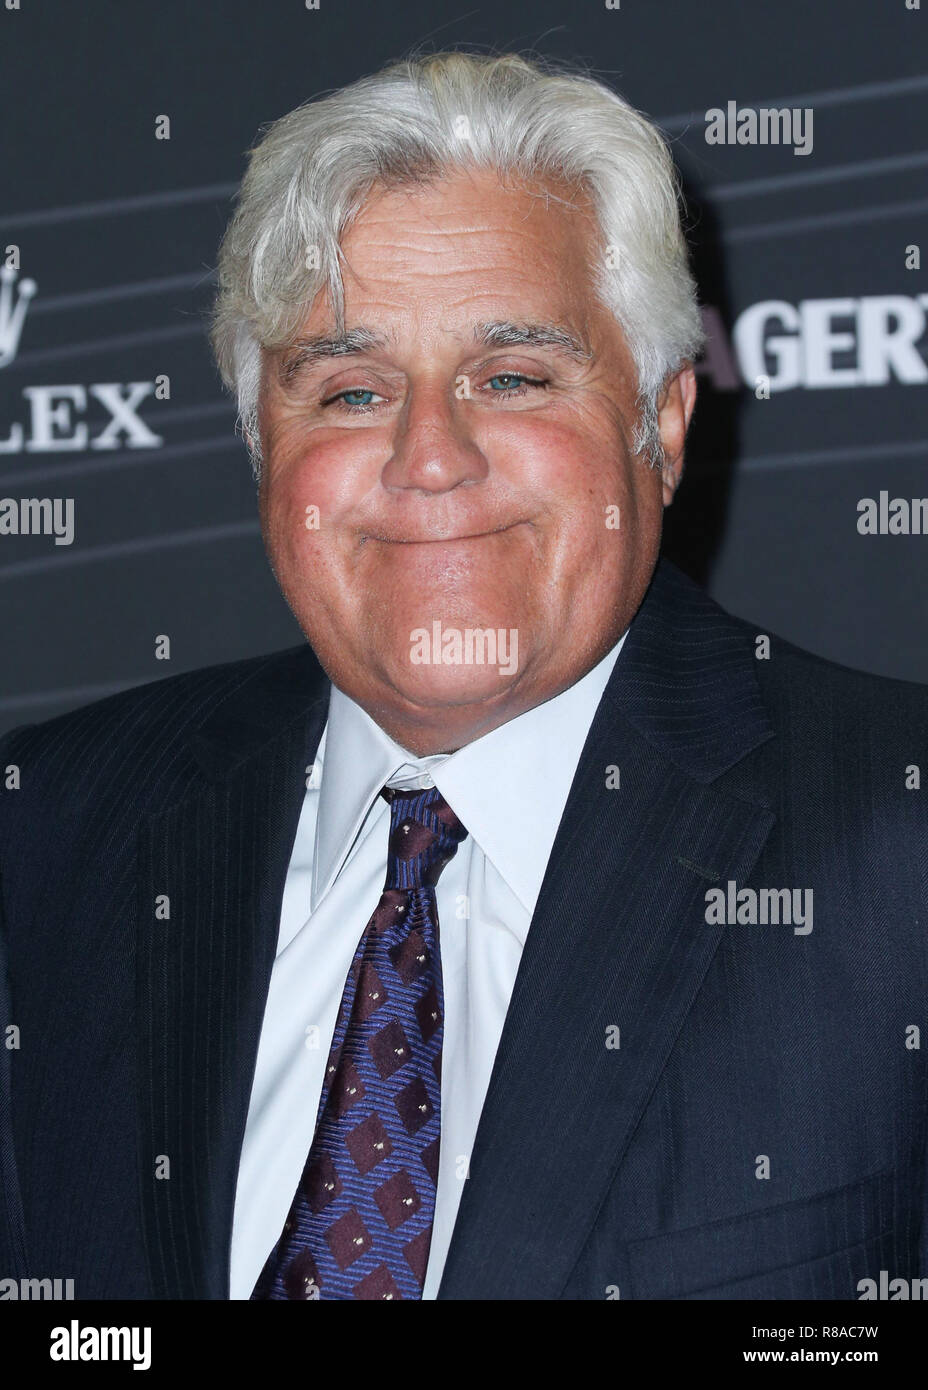 LOS ANGELES, CA, USA - OCTOBER 05: Jay Leno at the Petersen Automotive Museum Gala 2018 held at The Petersen Automotive Museum on October 5, 2018 in Los Angeles, California, United States. (Photo by David Acosta/Image Press Agency) Stock Photo